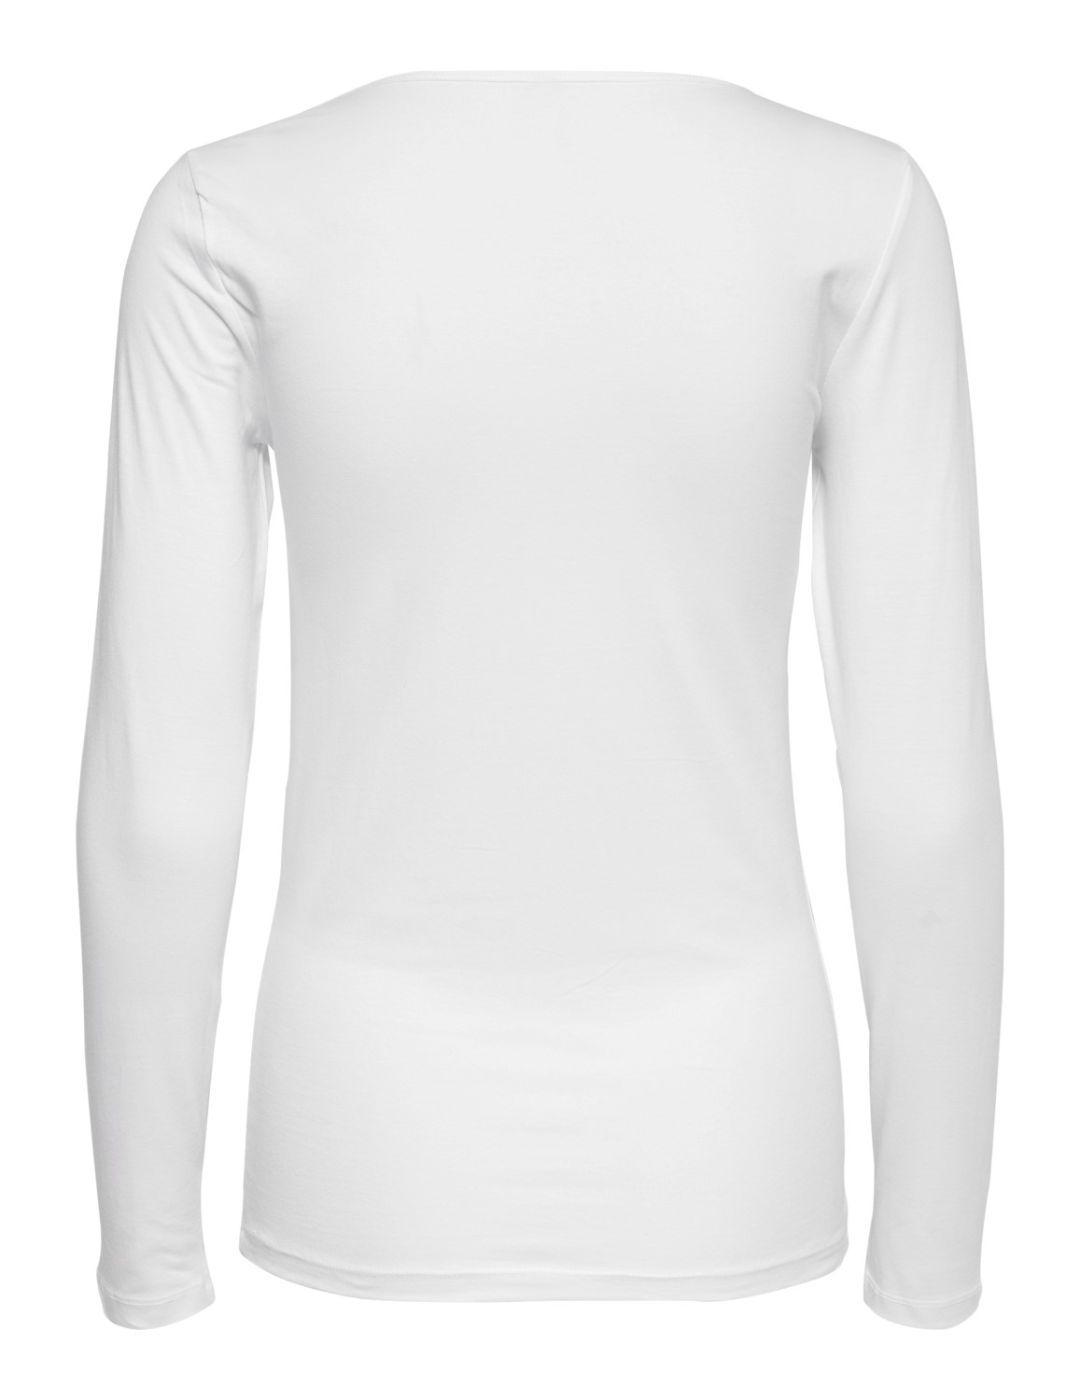 Camiseta Only Live Noos m/l blanca para mujer -a